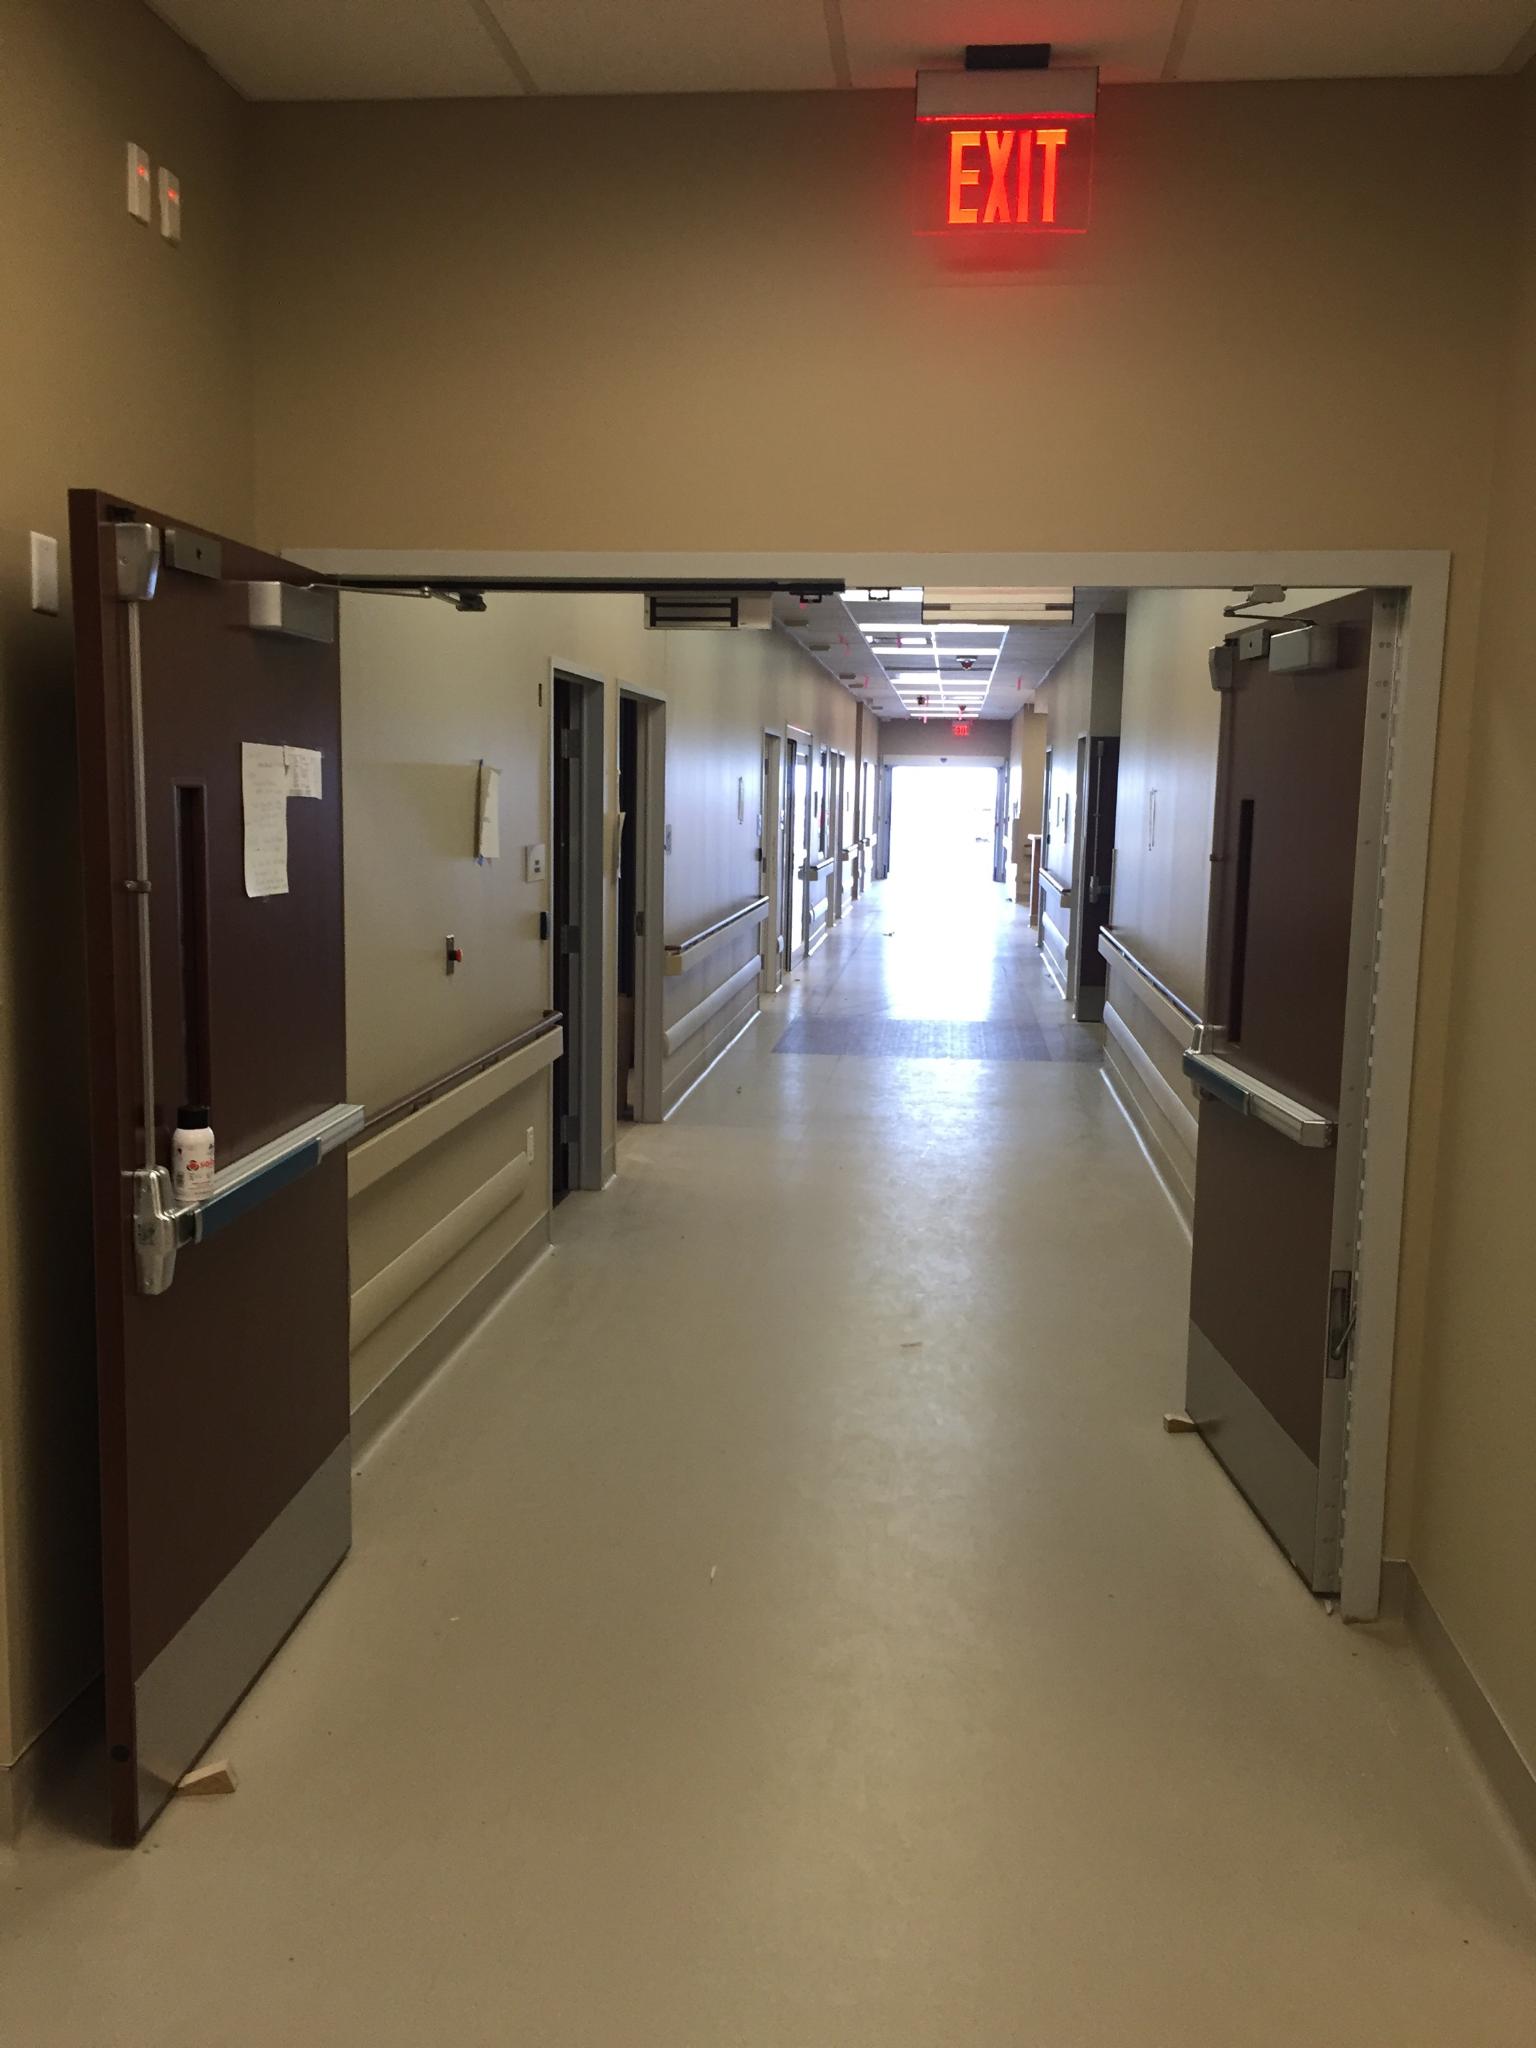 Hospital Fire-Rated Doors